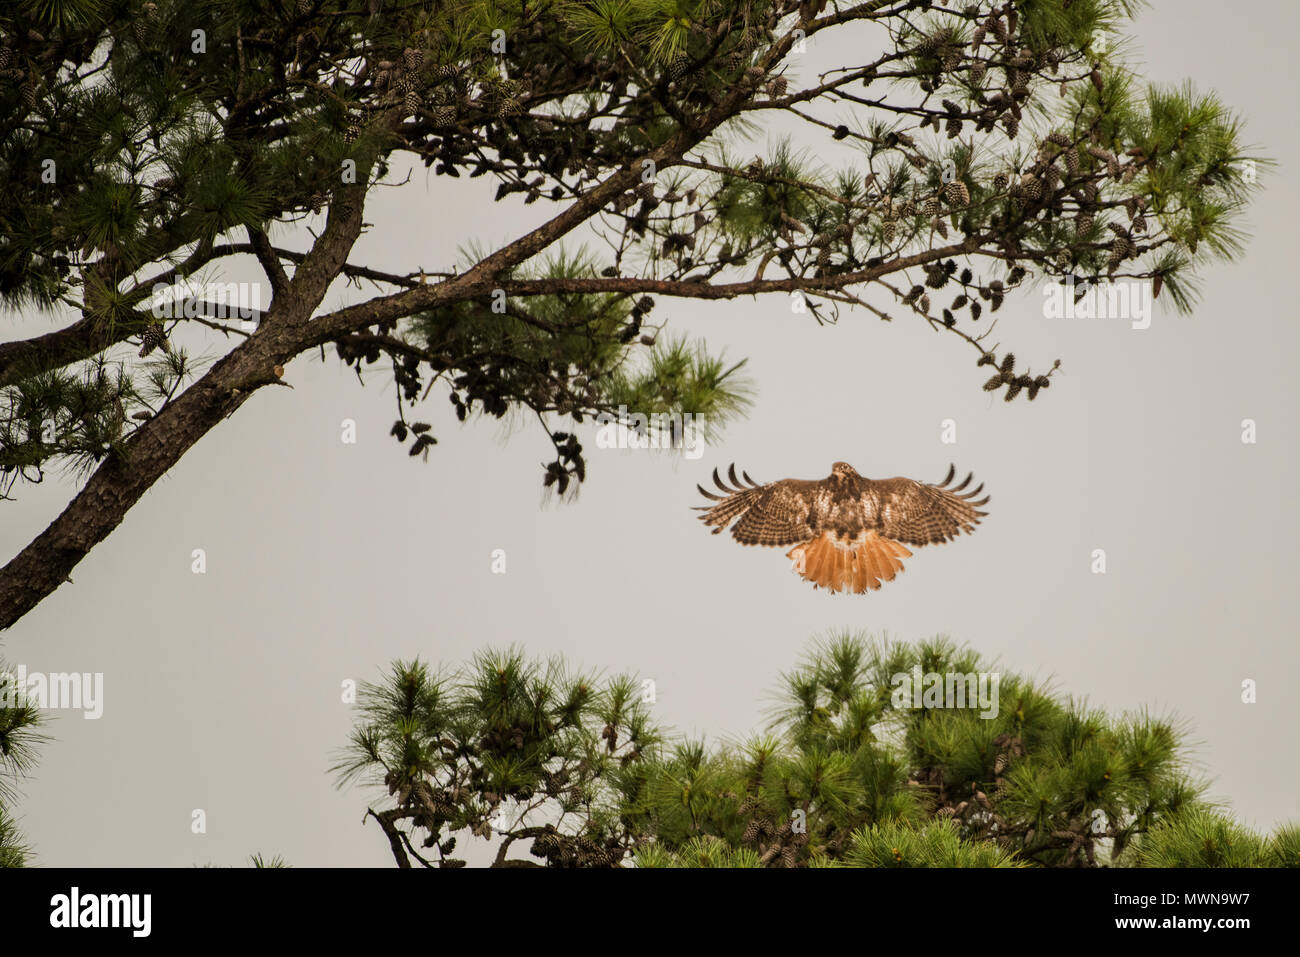 A red tailed hawk (Buteo jamaicensis) approaching a longleaf pine from below, about to land in the tree. Stock Photo